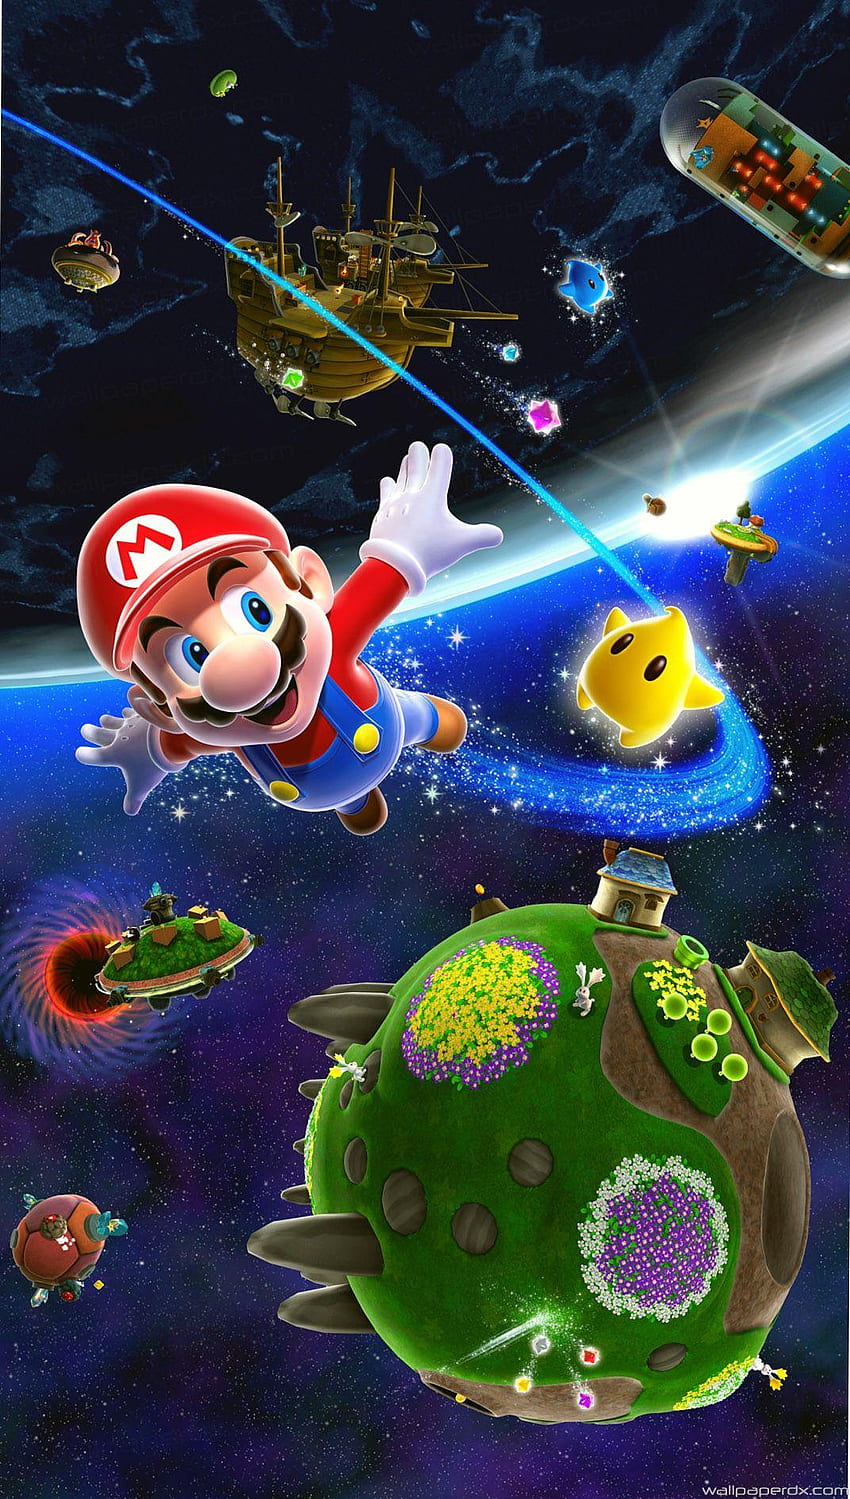 Made a mobile wallpaper from the new Super Mario Bros 2022 poster   riphonewallpapers